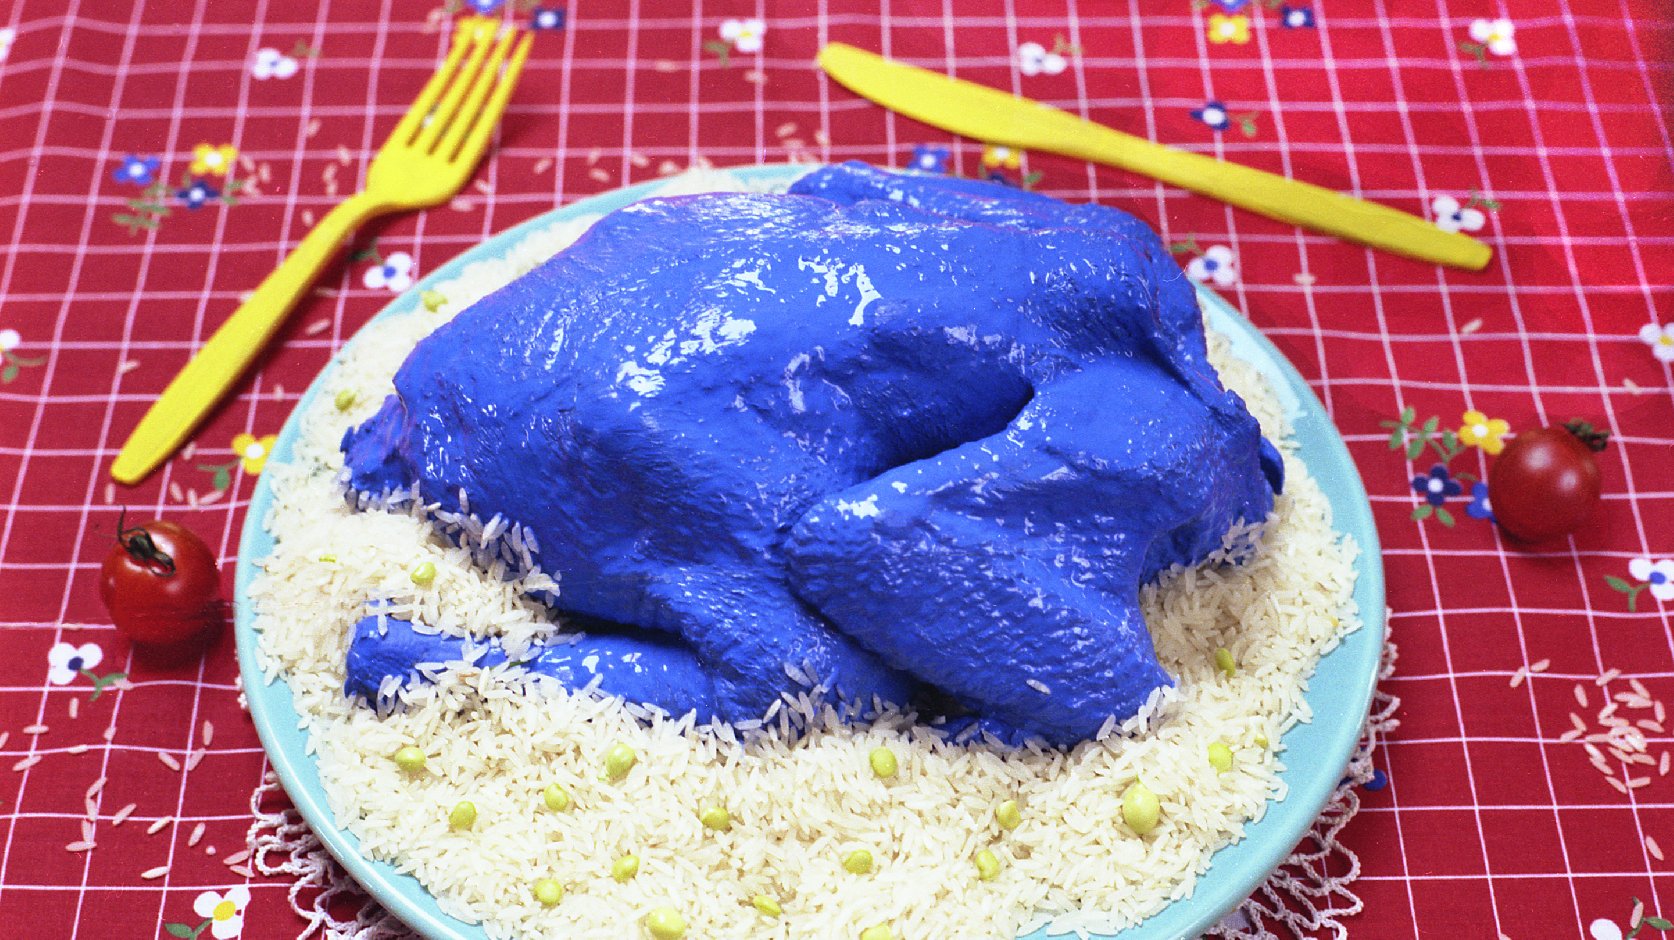 Does this blue chicken make you queasy? Scientists say there might be an evolutionary reason for that. Photo: Courtesy of Laurie Brown